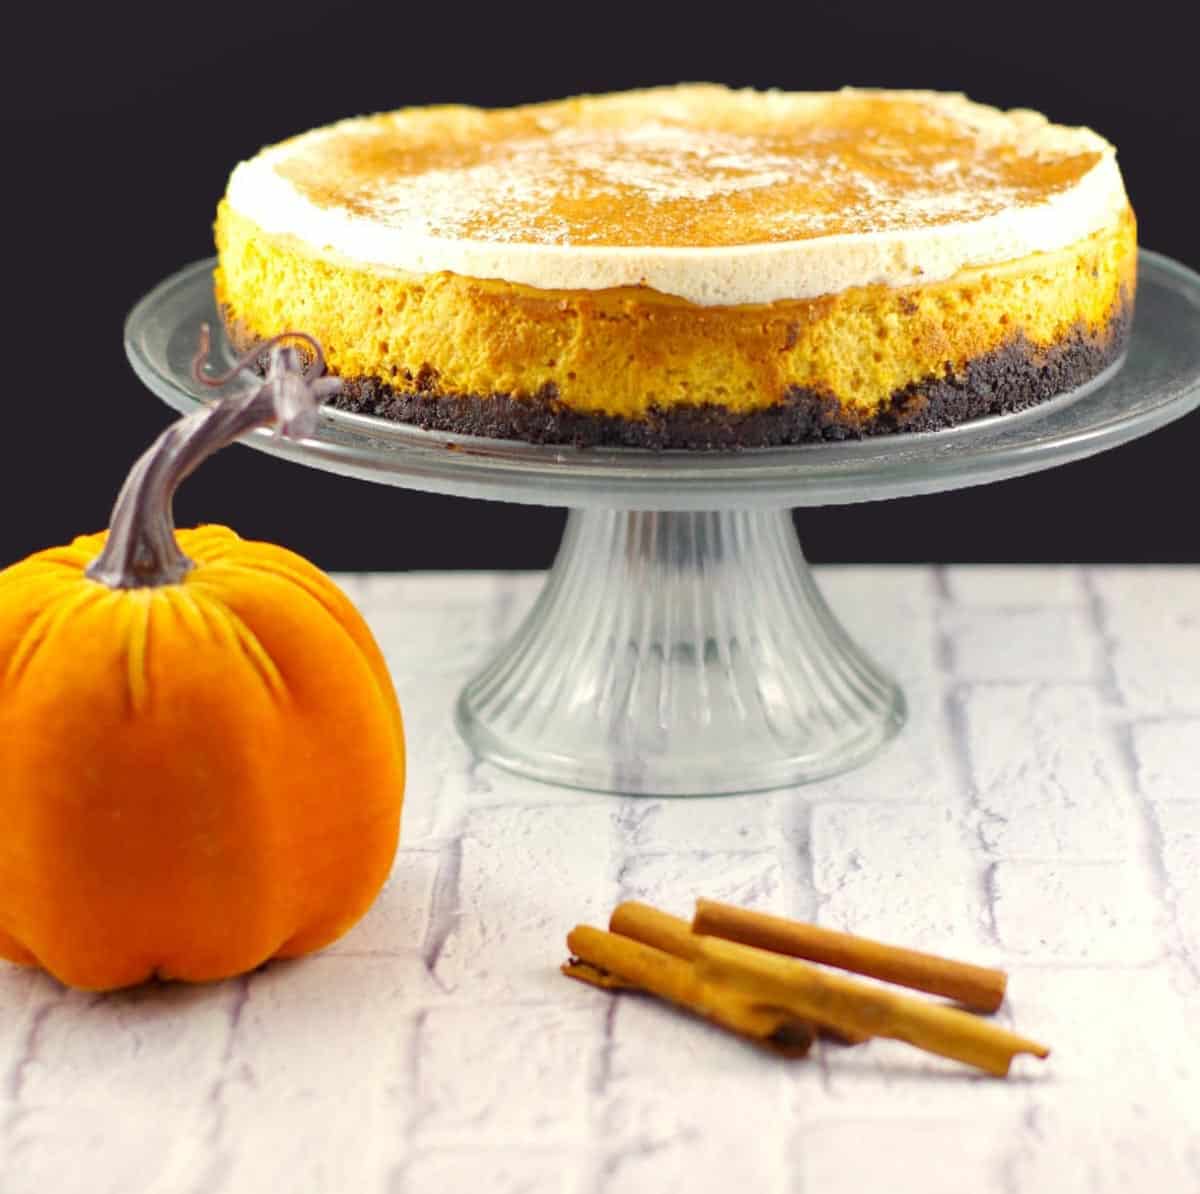 skinny pumpkin cheesecake on a glass cake stand with stuffed plush pumpkin and cinnamon sticks in front